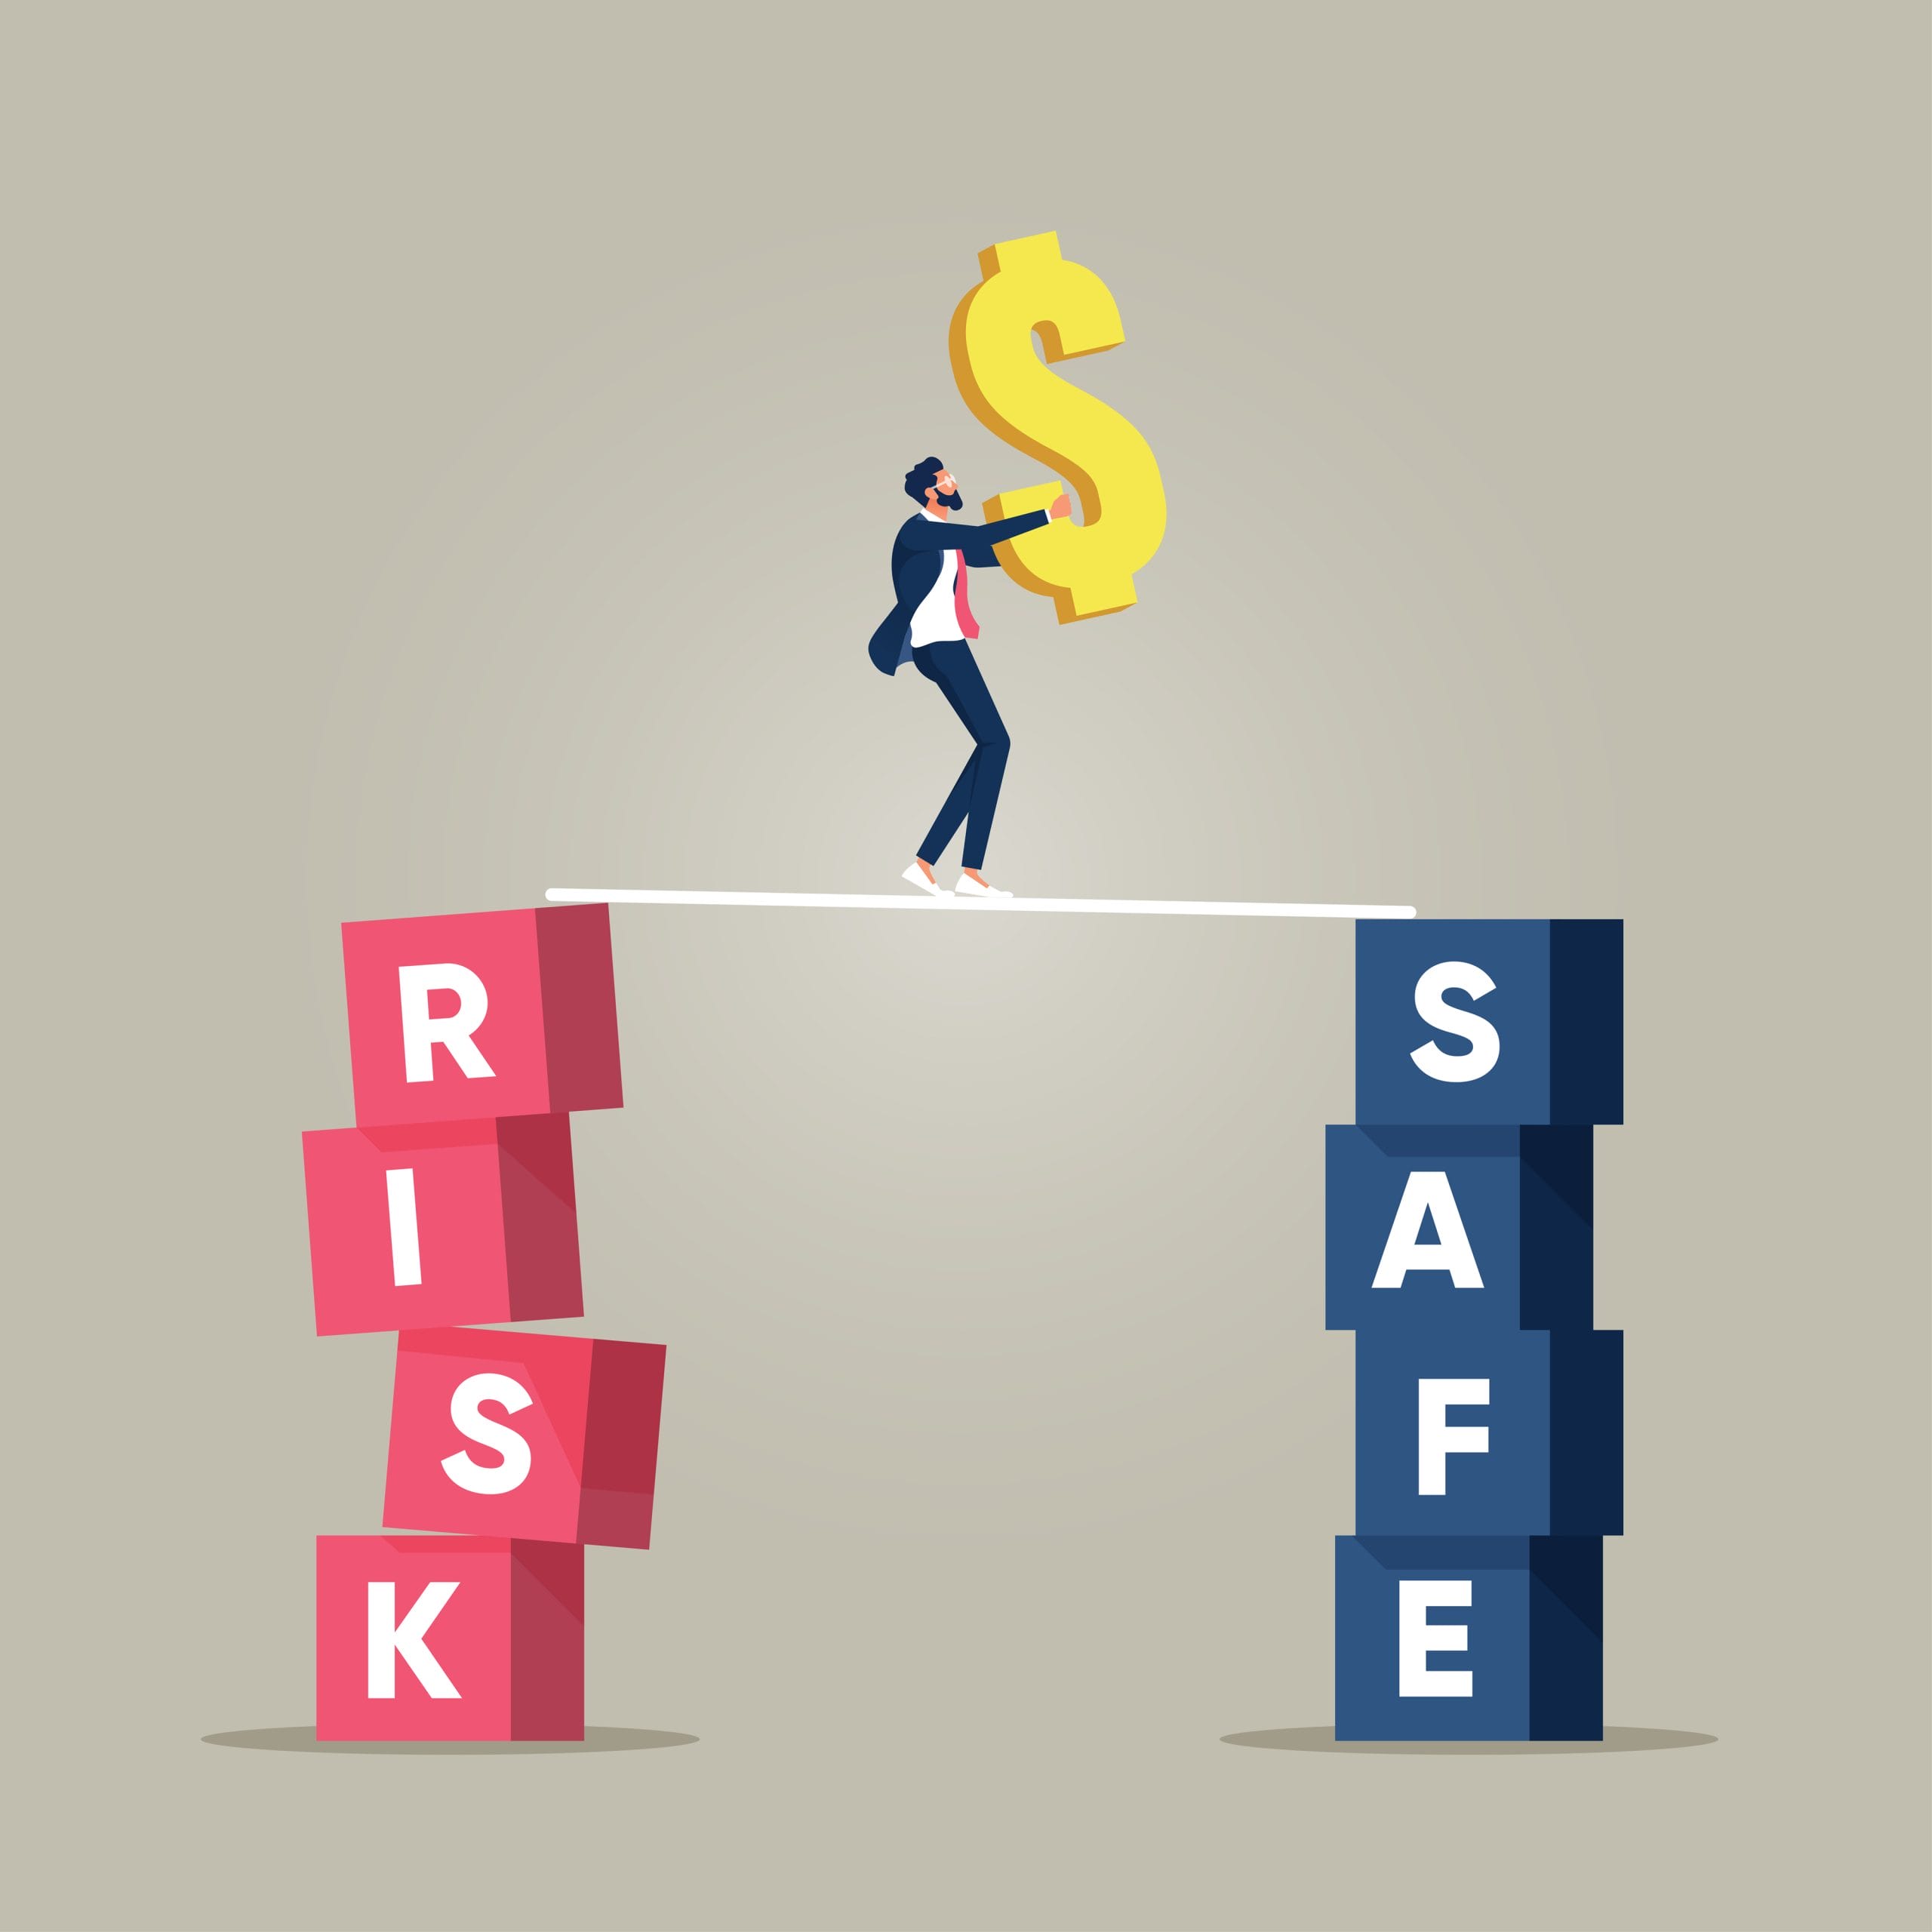 Take a risk or safety concept